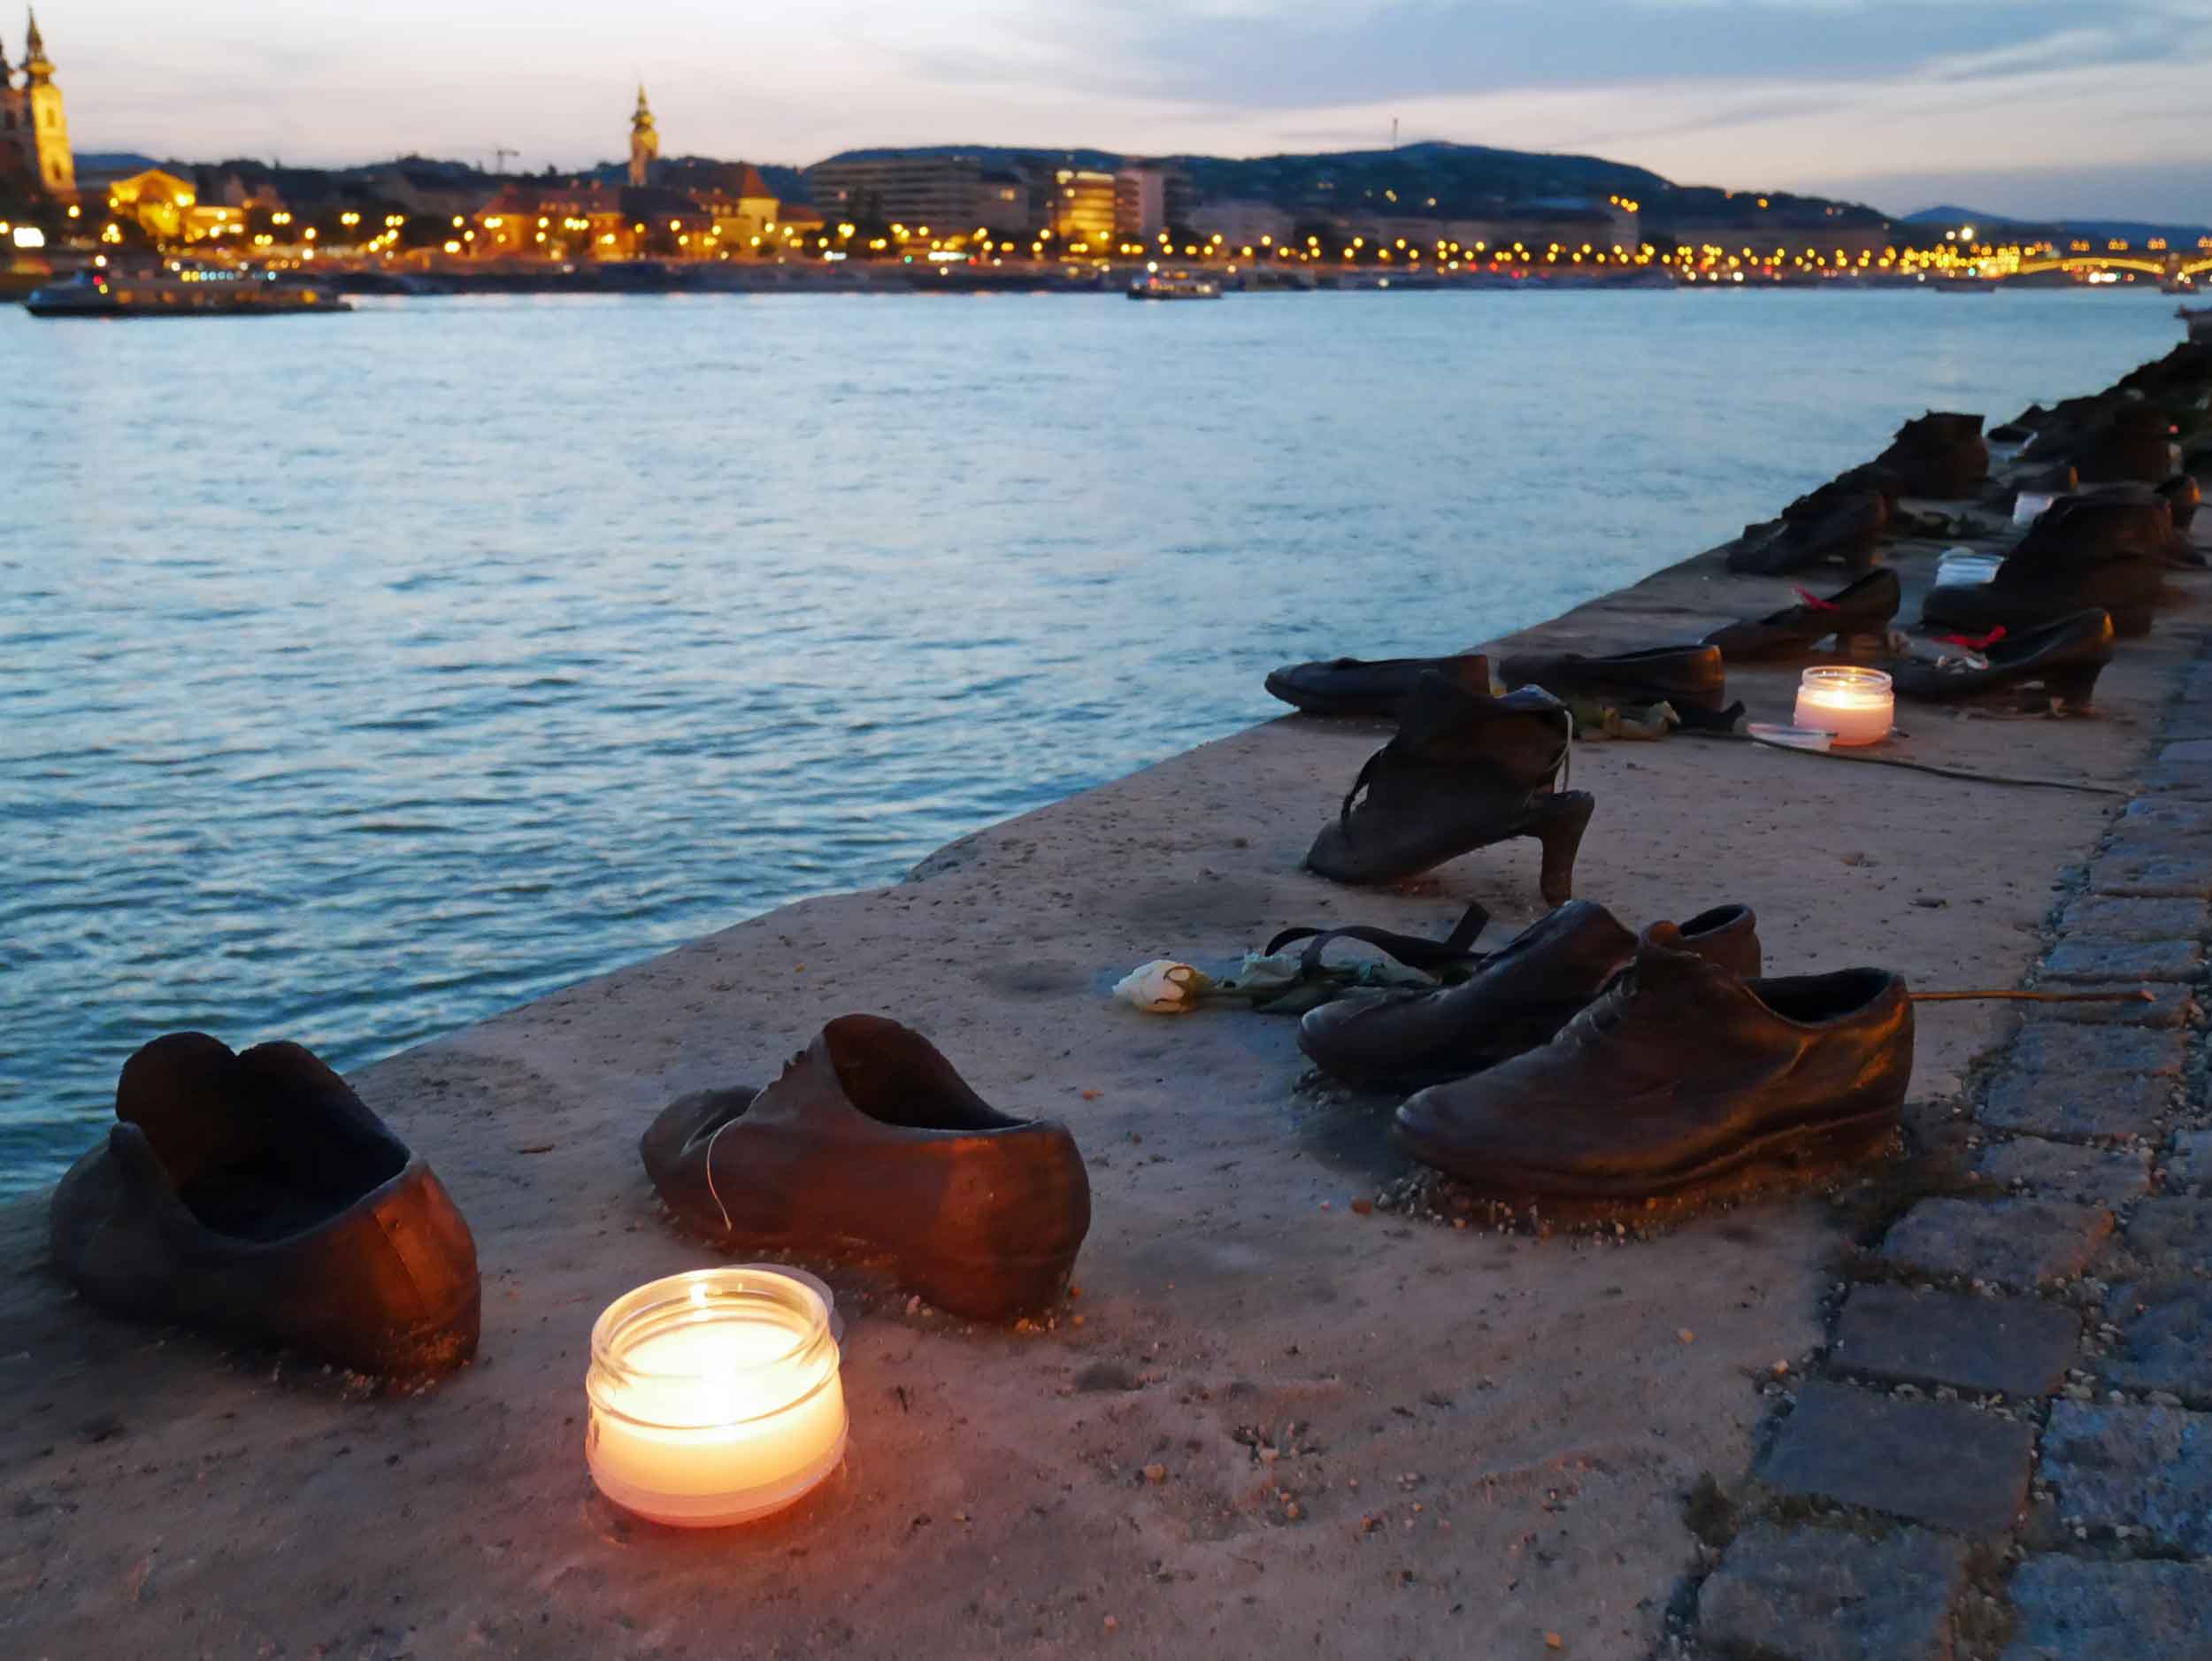  Strolling the Danube, we passed "Shoes on the Danube Bank," a memorial to the horrific events of the mid-1940s when Jewish people were ordered to remove their shoes before being shot and falling into the river.&nbsp; 